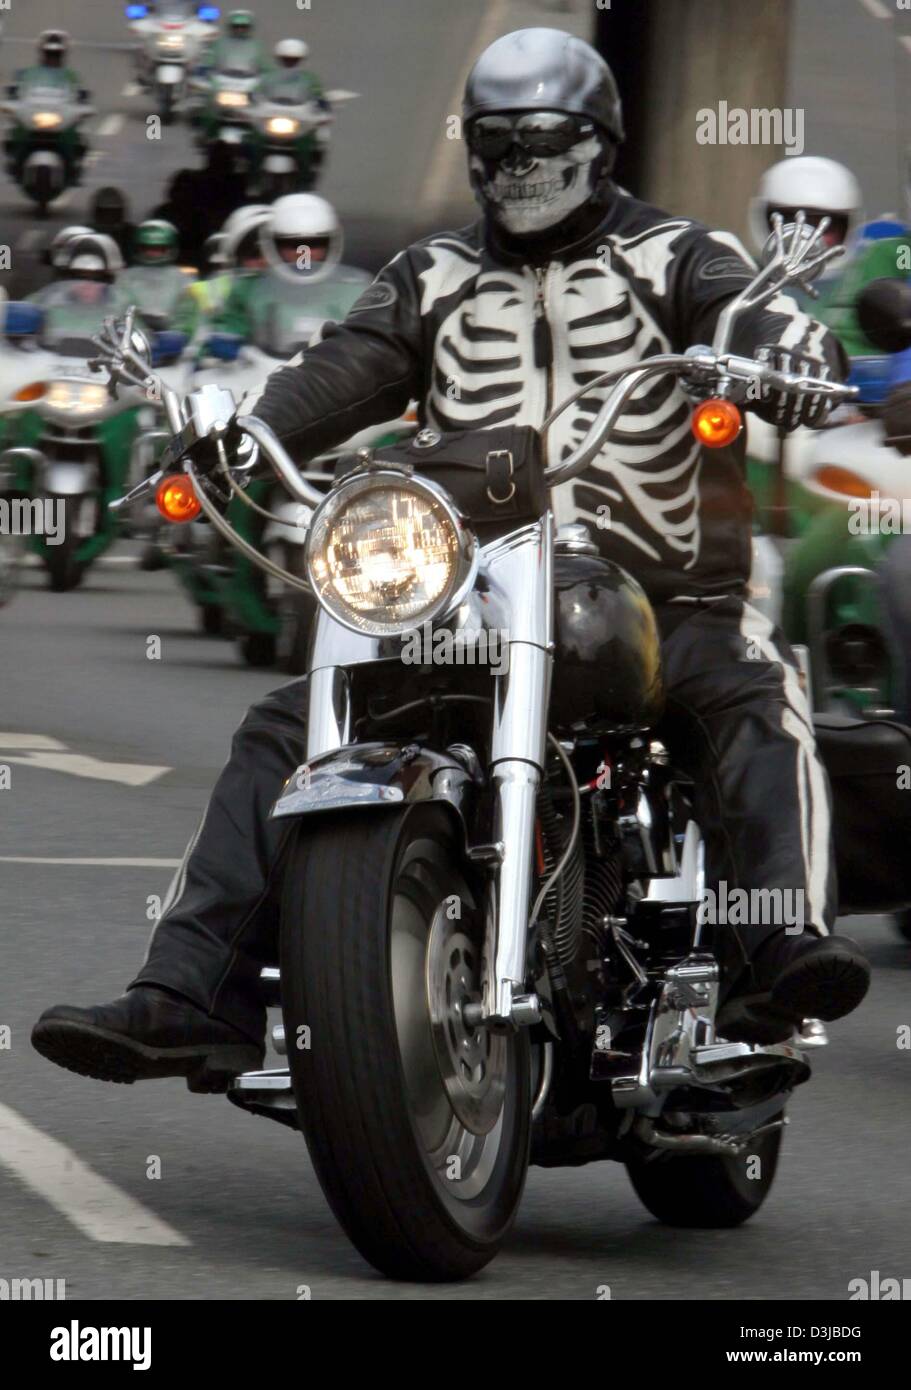 Ghost Rider Bike Stock Photos & Ghost Rider Bike Stock Images - Alamy